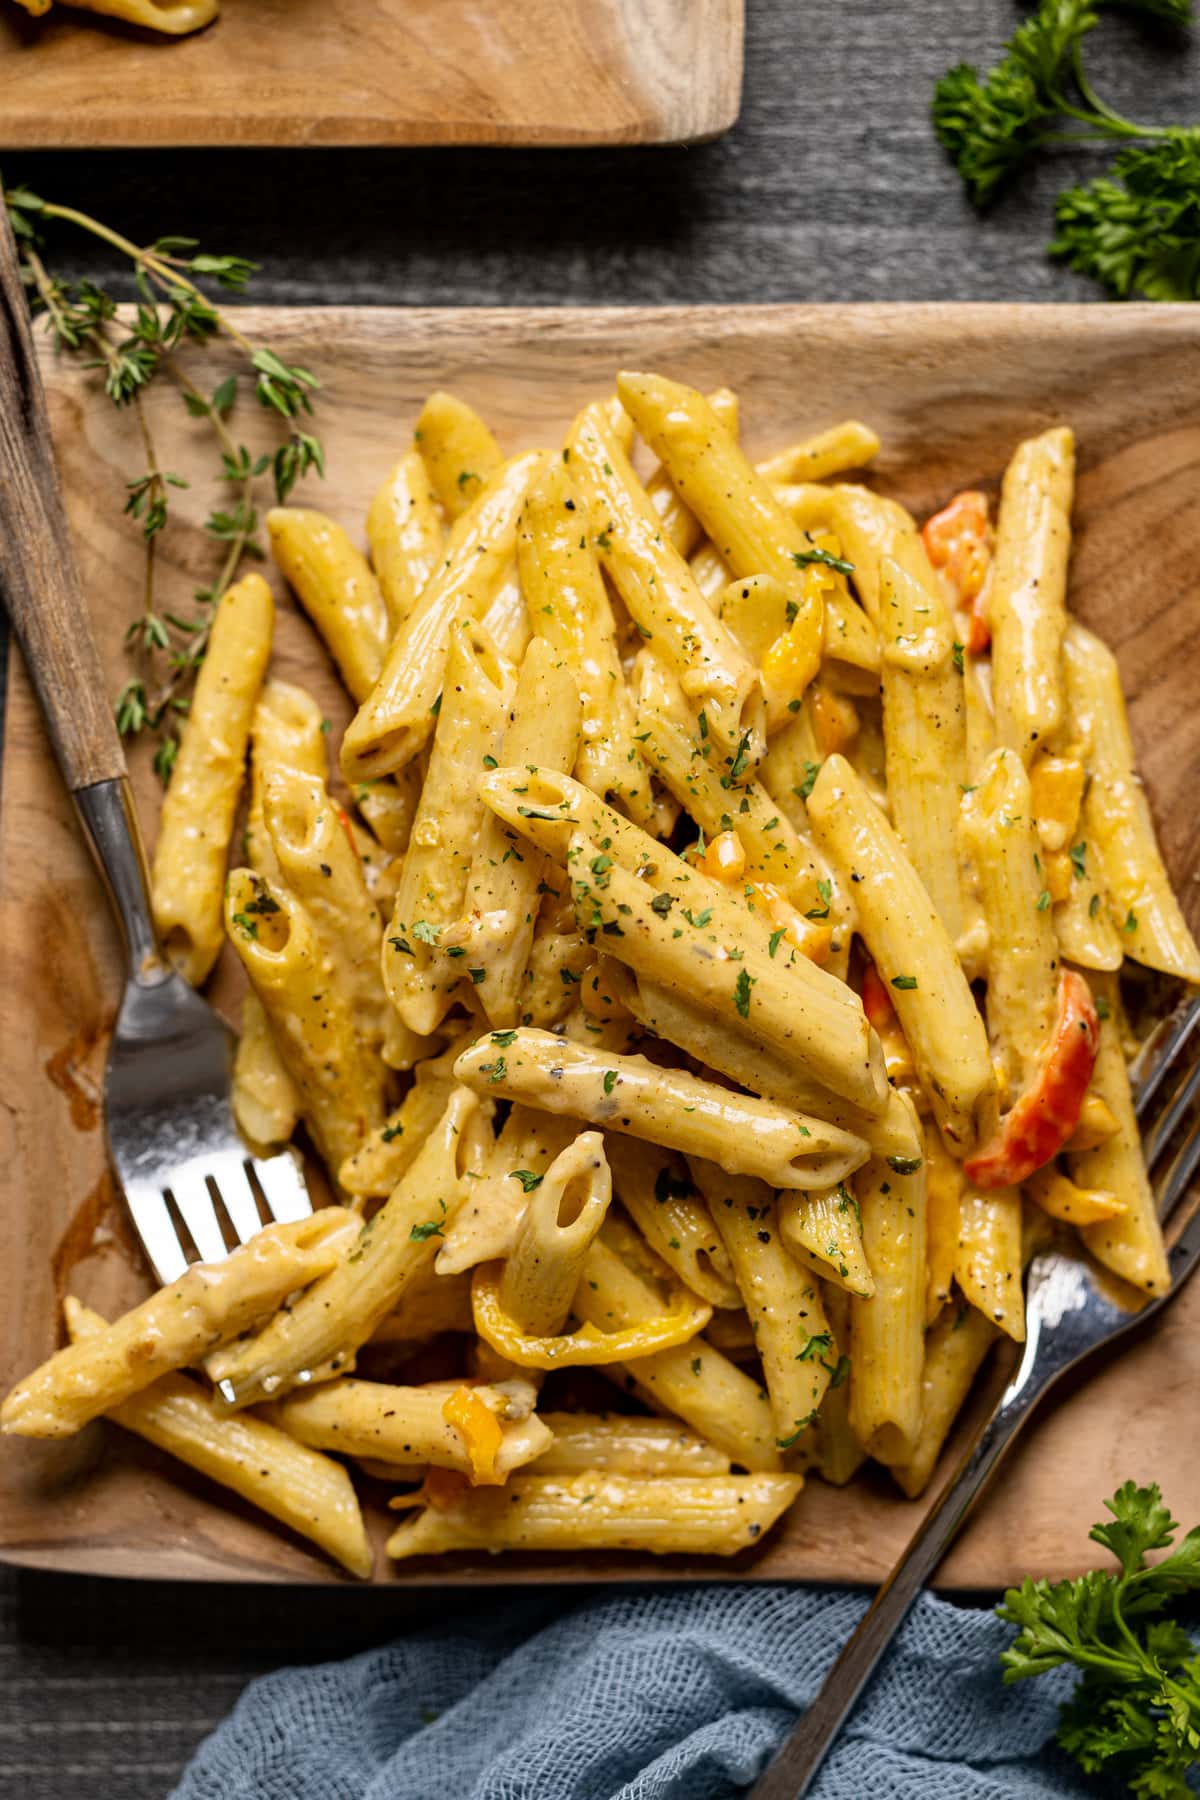 Plate of Creamy Jamaican Rasta Pasta with two forks